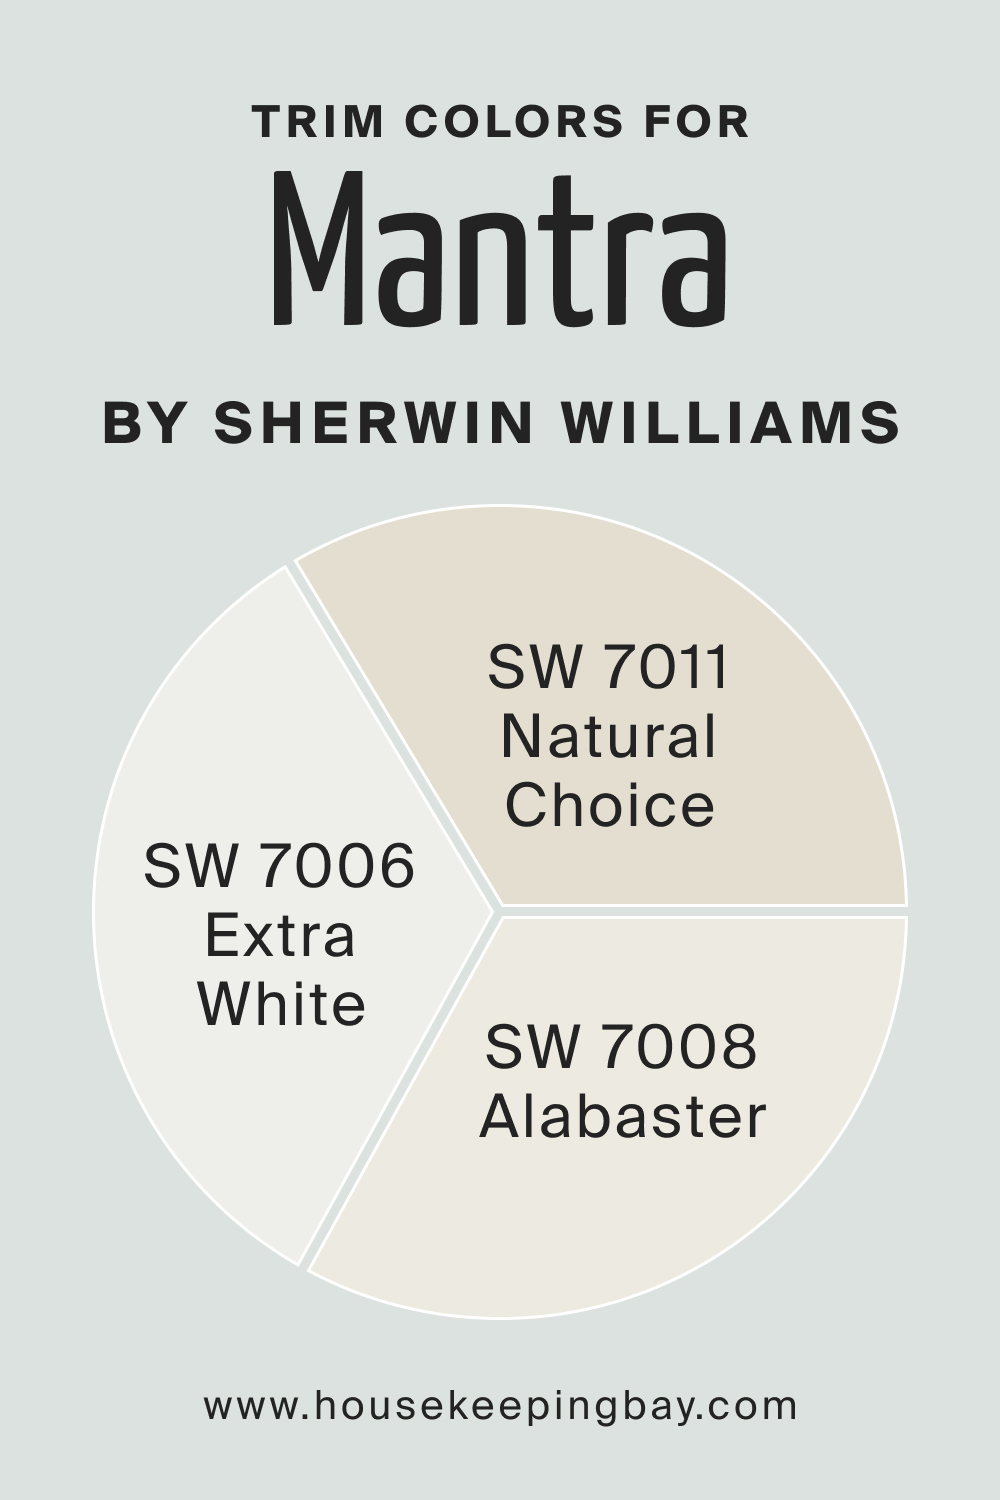 Trim Colors of SW 9631 Mantra by Sherwin Williams